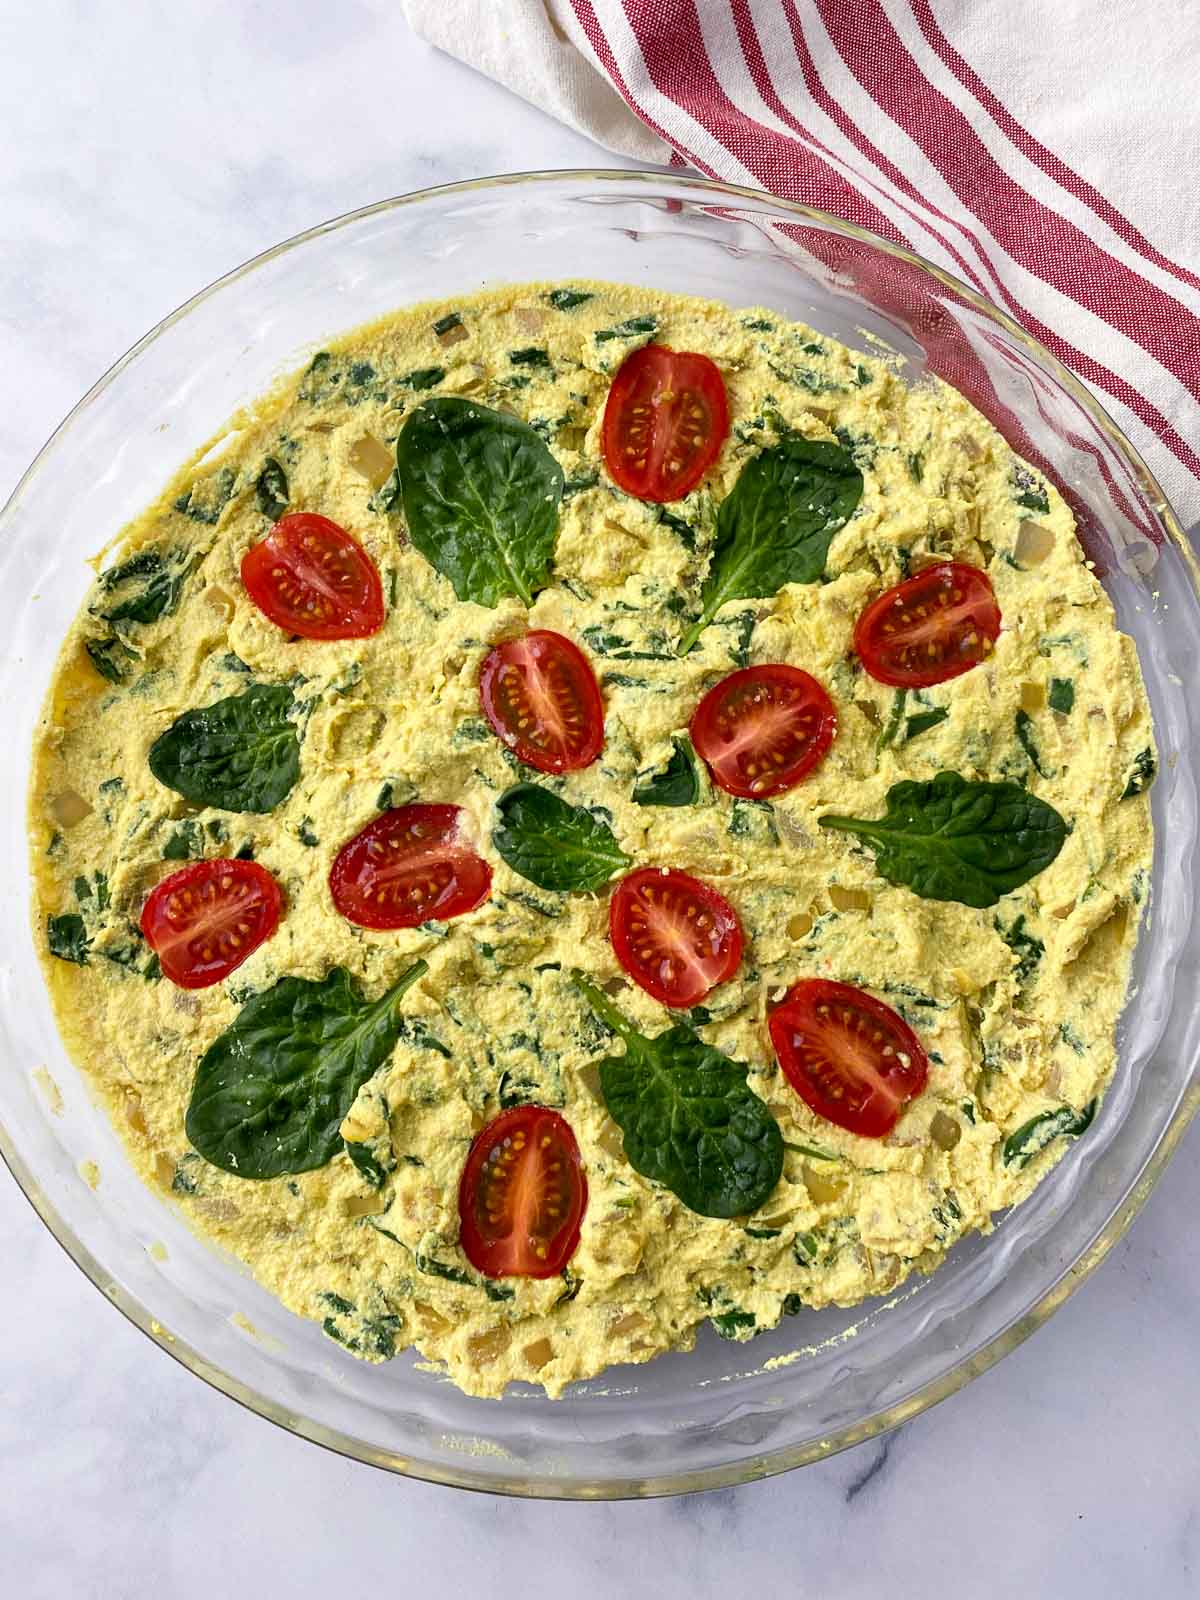 Spinach frittata before baking.